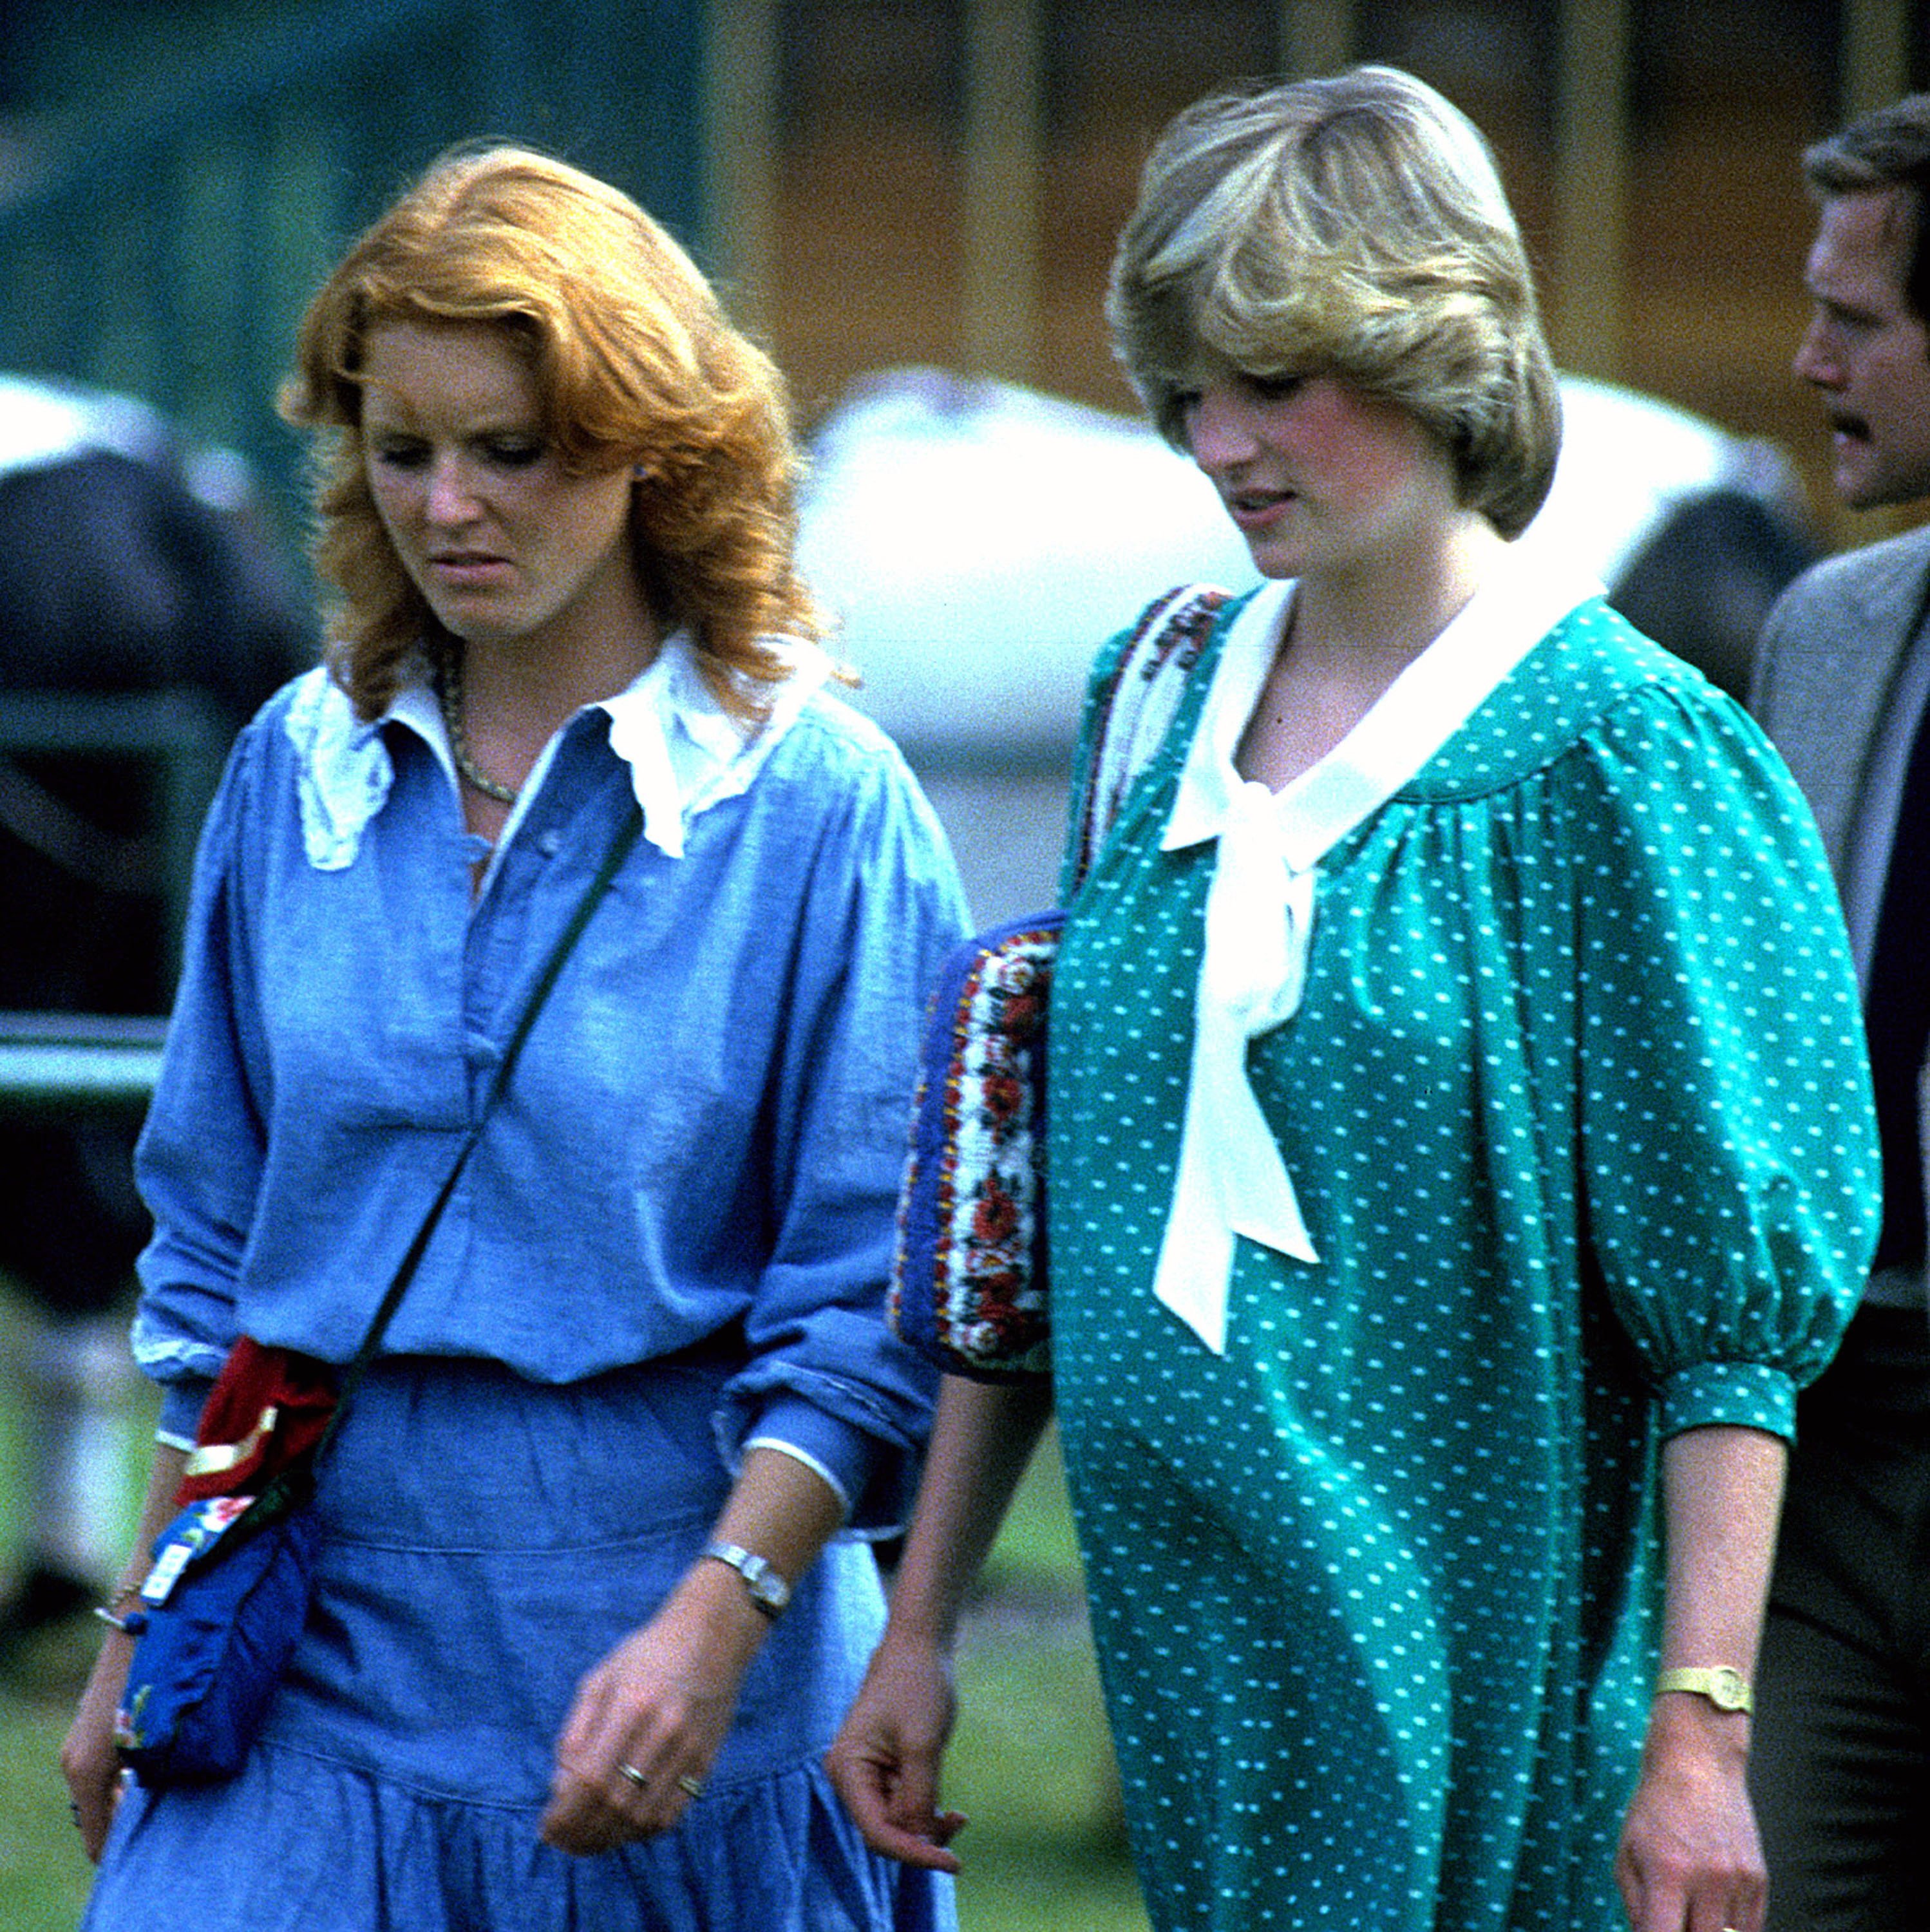 Princess Diana pregnant with Prince William at Windsor Polo with Sarah Ferguson on June 6, 1982. / Source: Getty Images